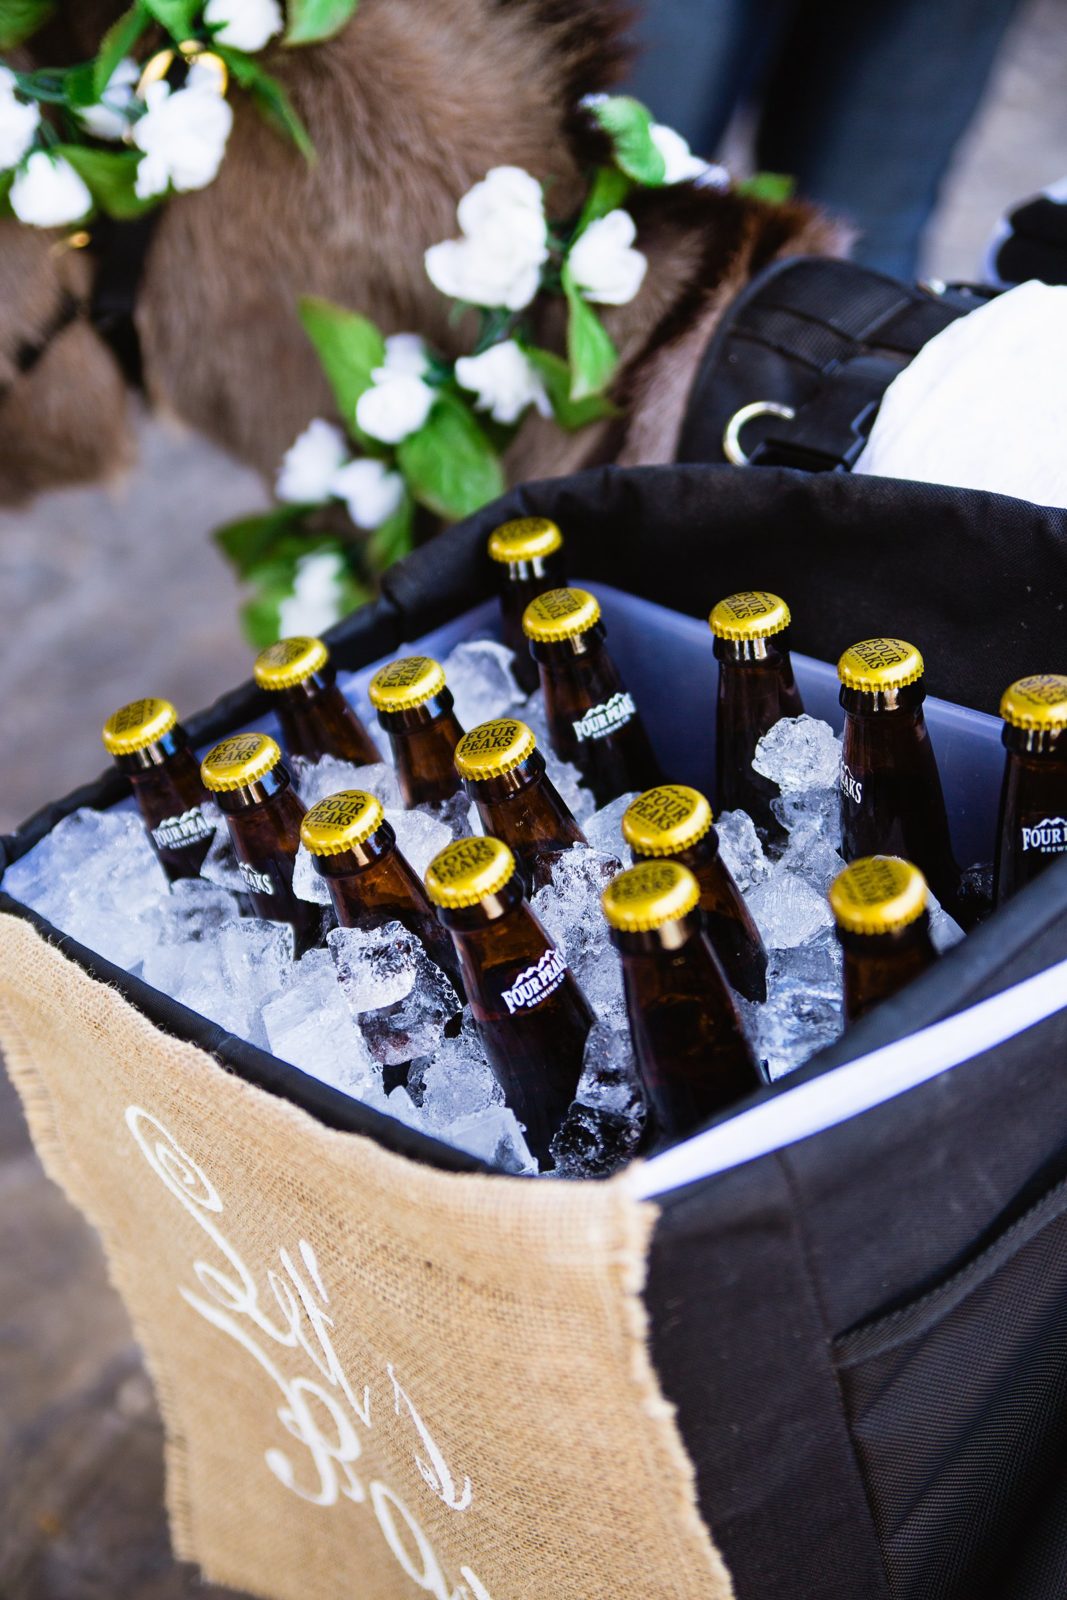 The beer burro's side satchel of beer by PMA Photography.